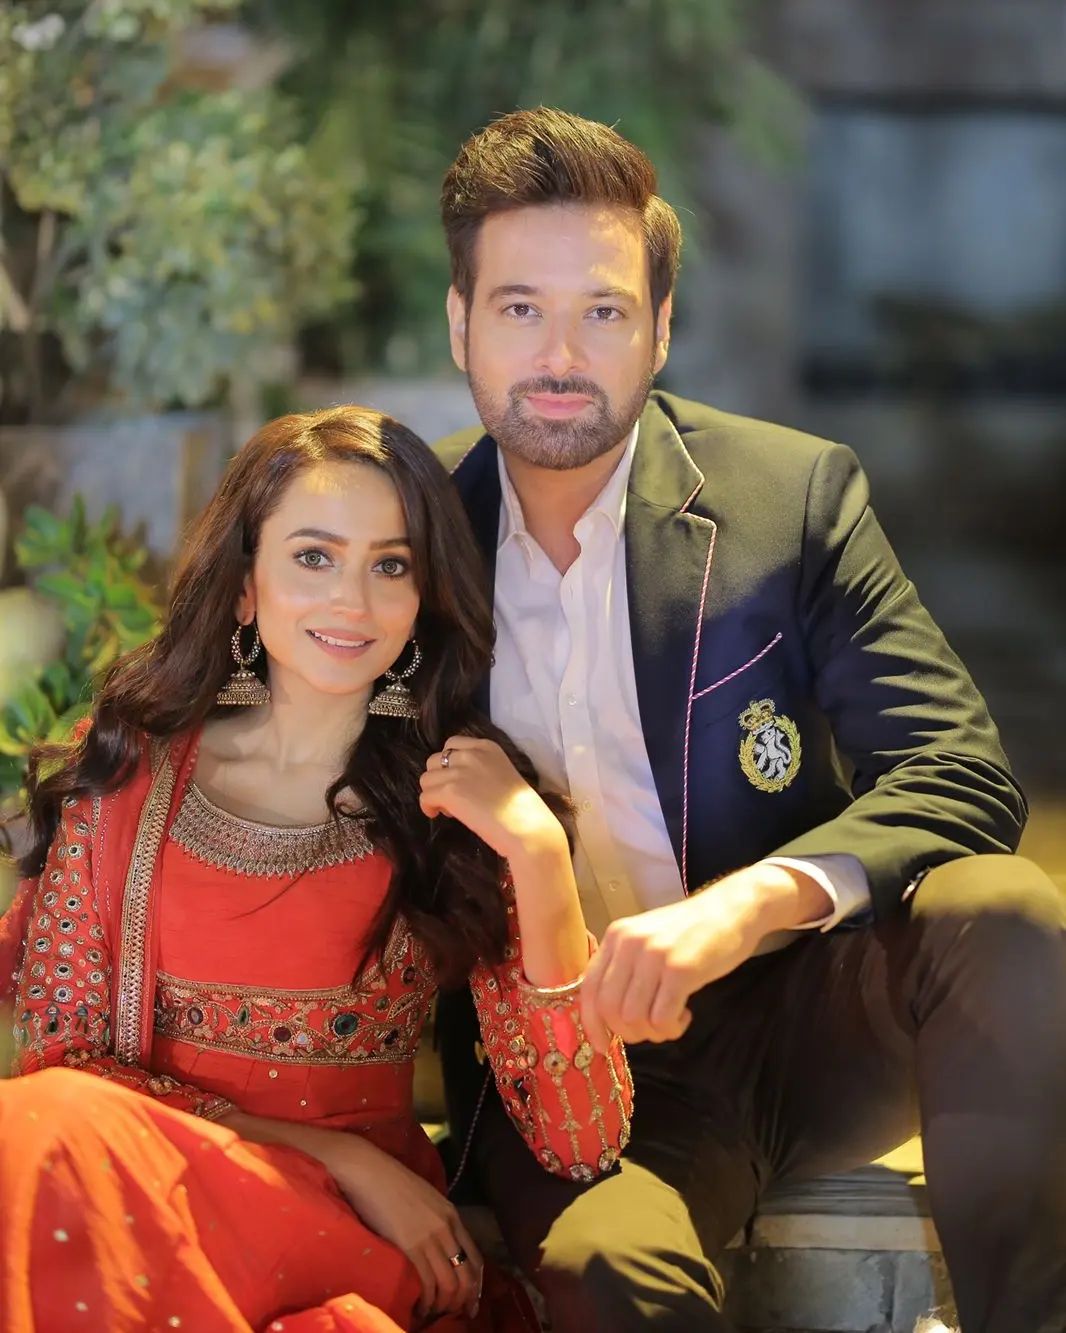 , Fraud Drama (Hum TV) Cast and Crew, Roles, Release Date, Story, Trailer